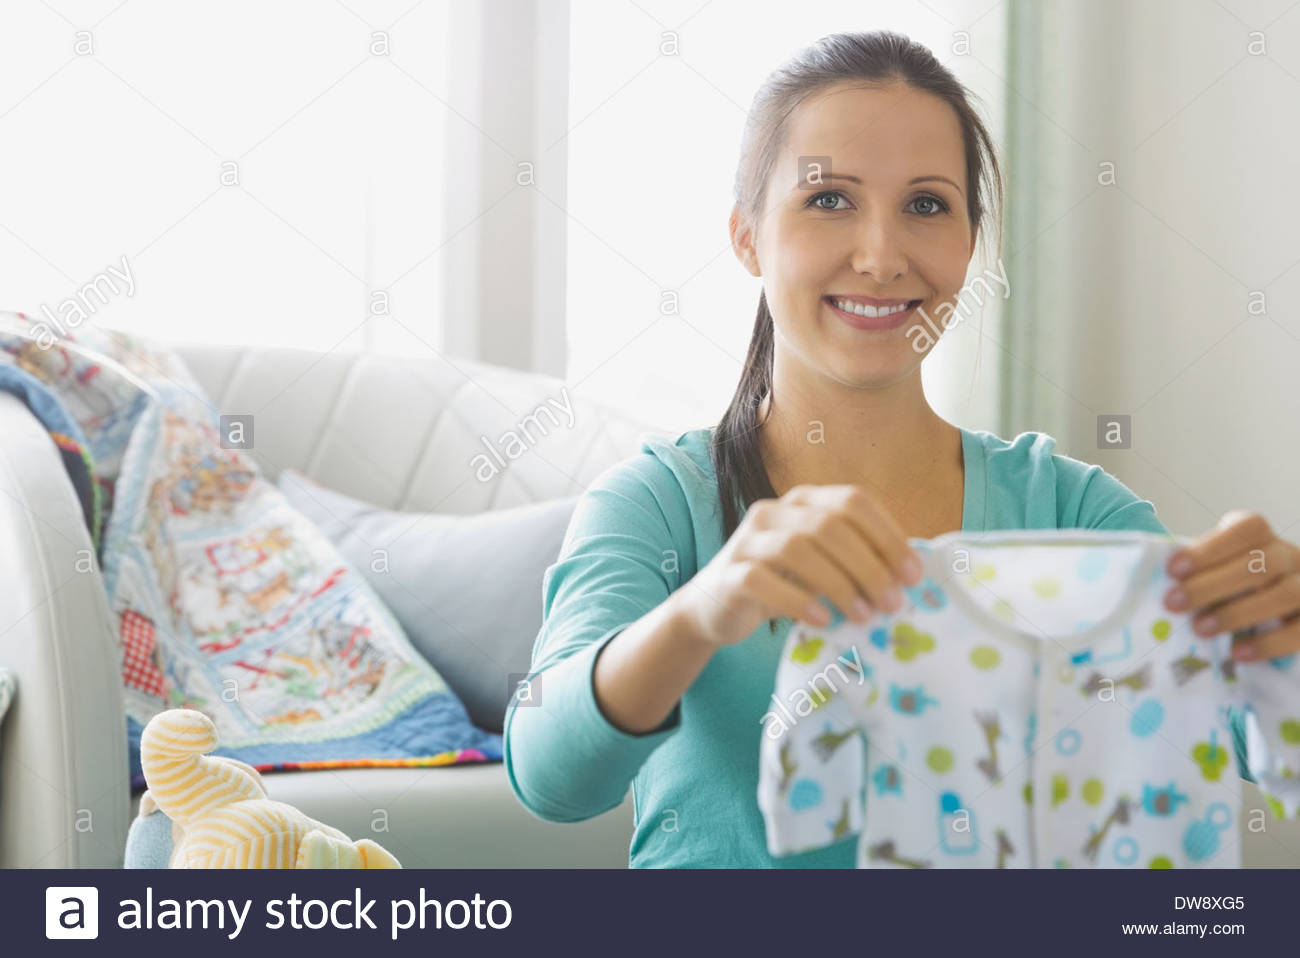 Pregnant woman holding baby onesie in nursery Banque D'Images